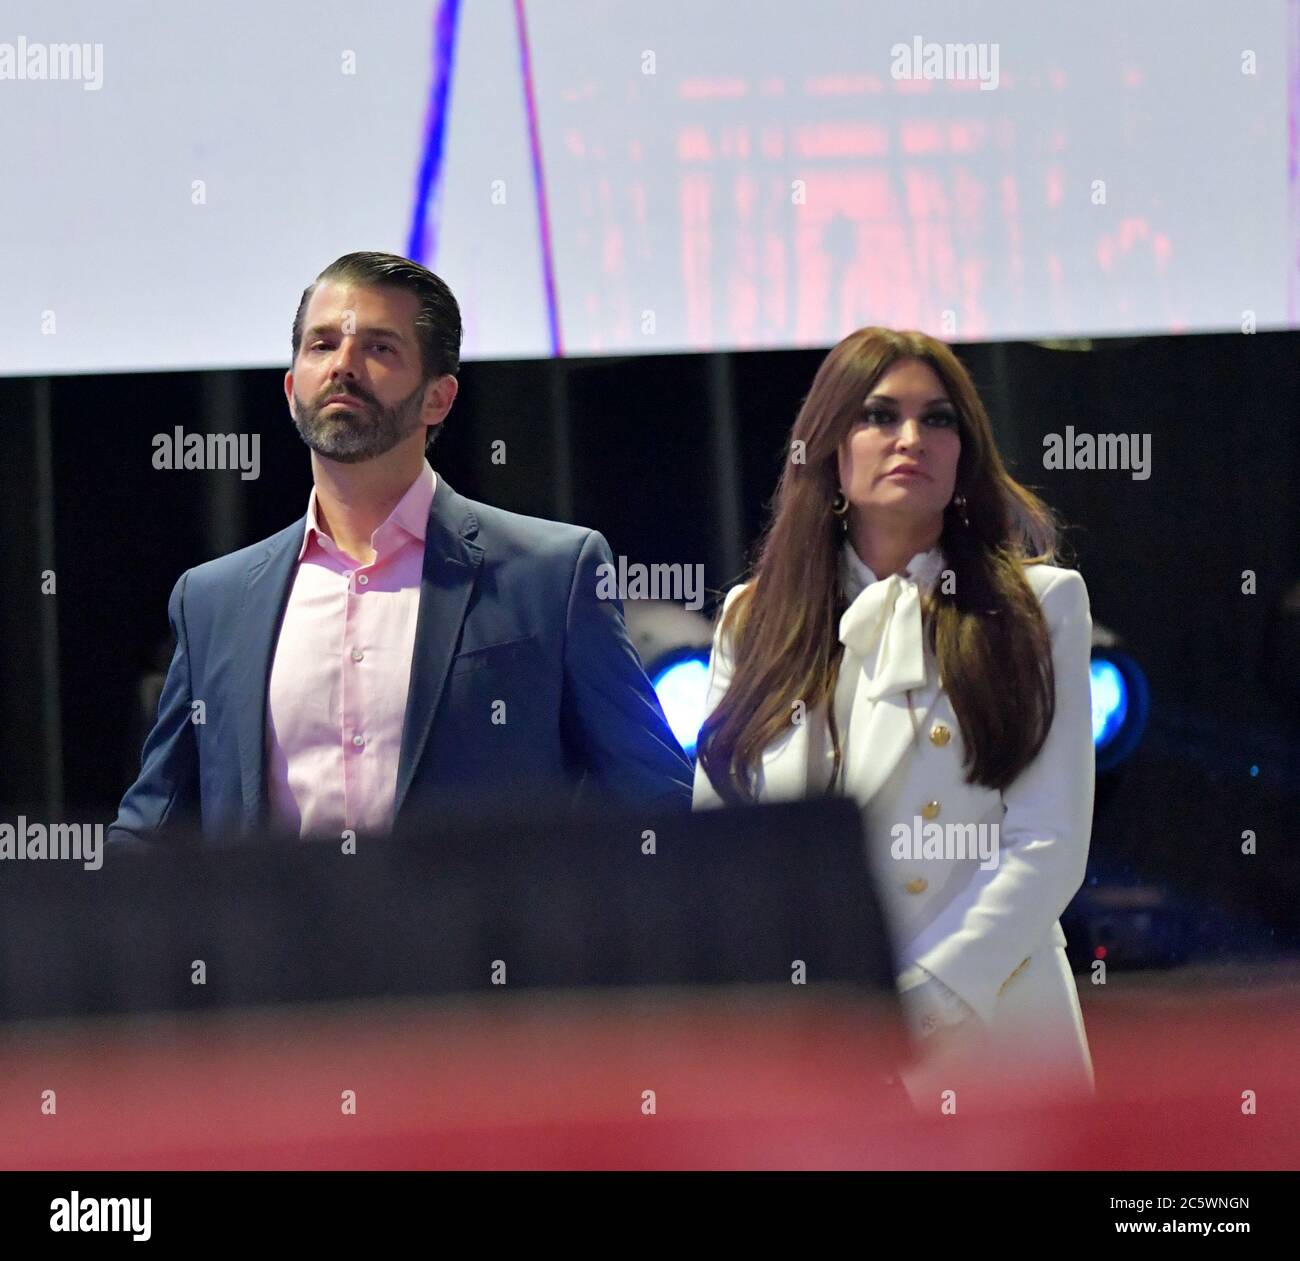 West PALM BEACH, Florida - 21 DICEMBRE: Donald Trump Jr, Kimberly Guilfoyle al Turning Point USA Student Action Summit del 2019 - giorno 3 al Palm Beach County Convention Center il 21 dicembre 2019 a West Palm Beach, Florida. People: Donald Trump Jr, Kimberly Guilfoyle Credit: Storms Media Group/Alamy Live News Foto Stock